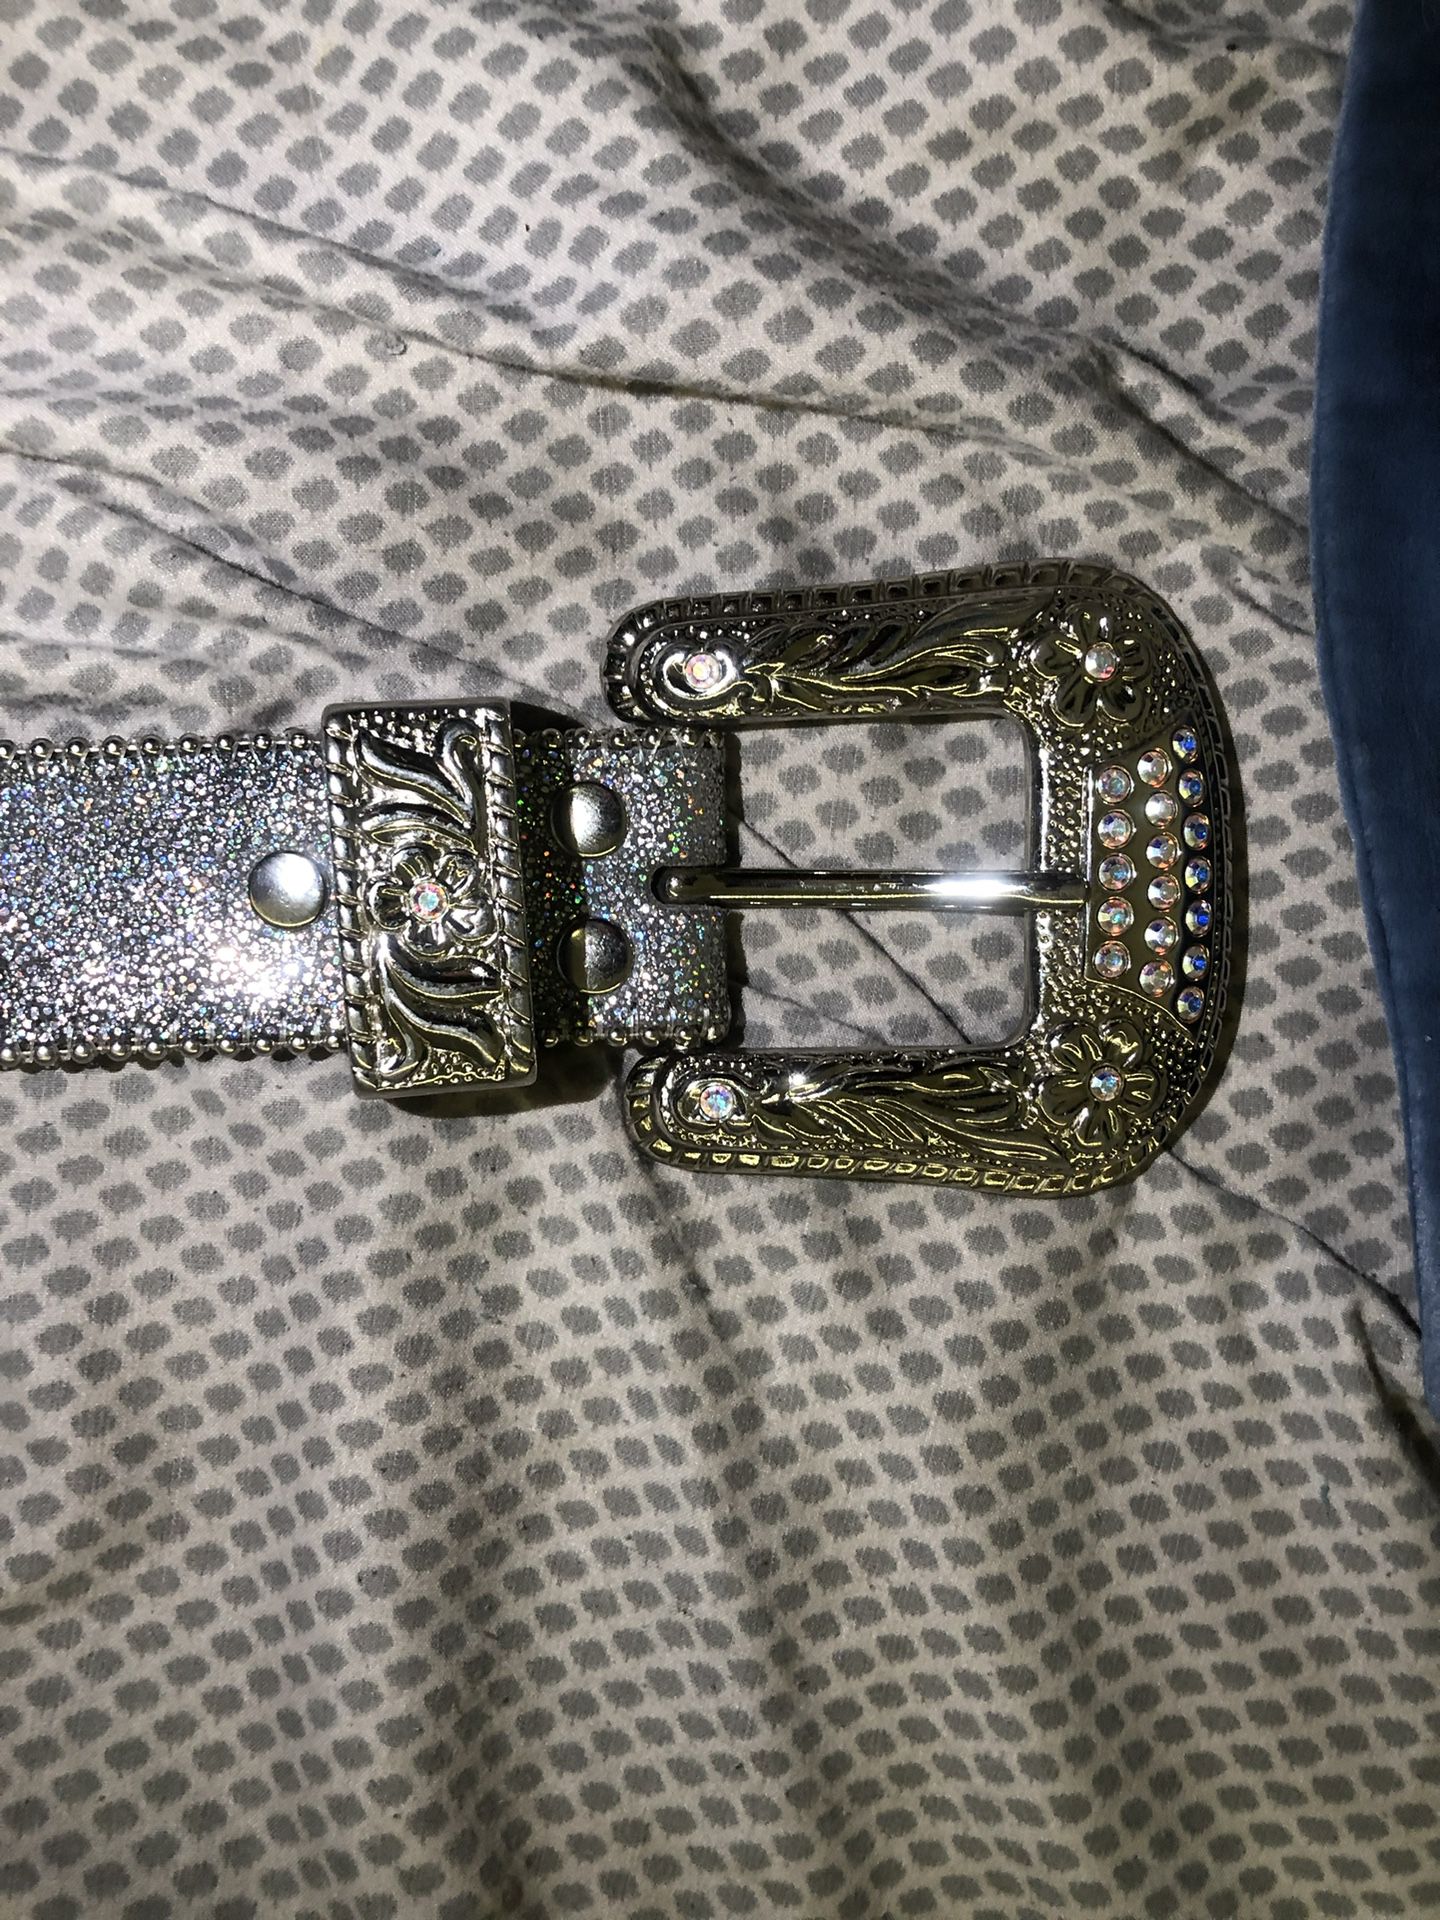 Bb Simon Belt for Sale in Milwaukee, WI - OfferUp